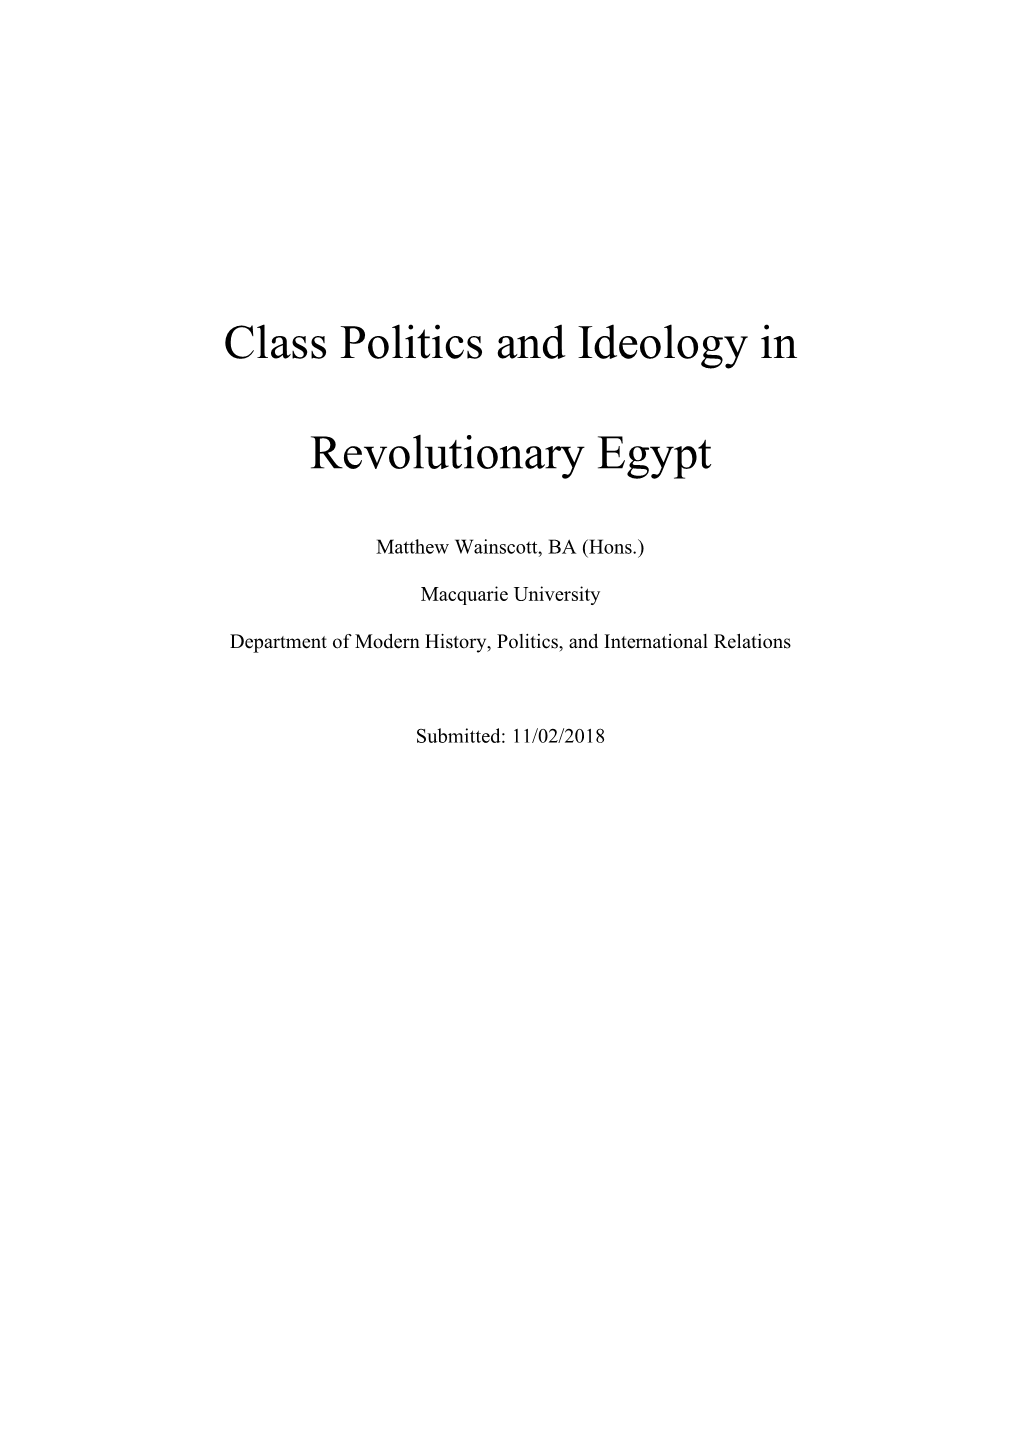 Class Politics and Ideology in Revolutionary Egypt